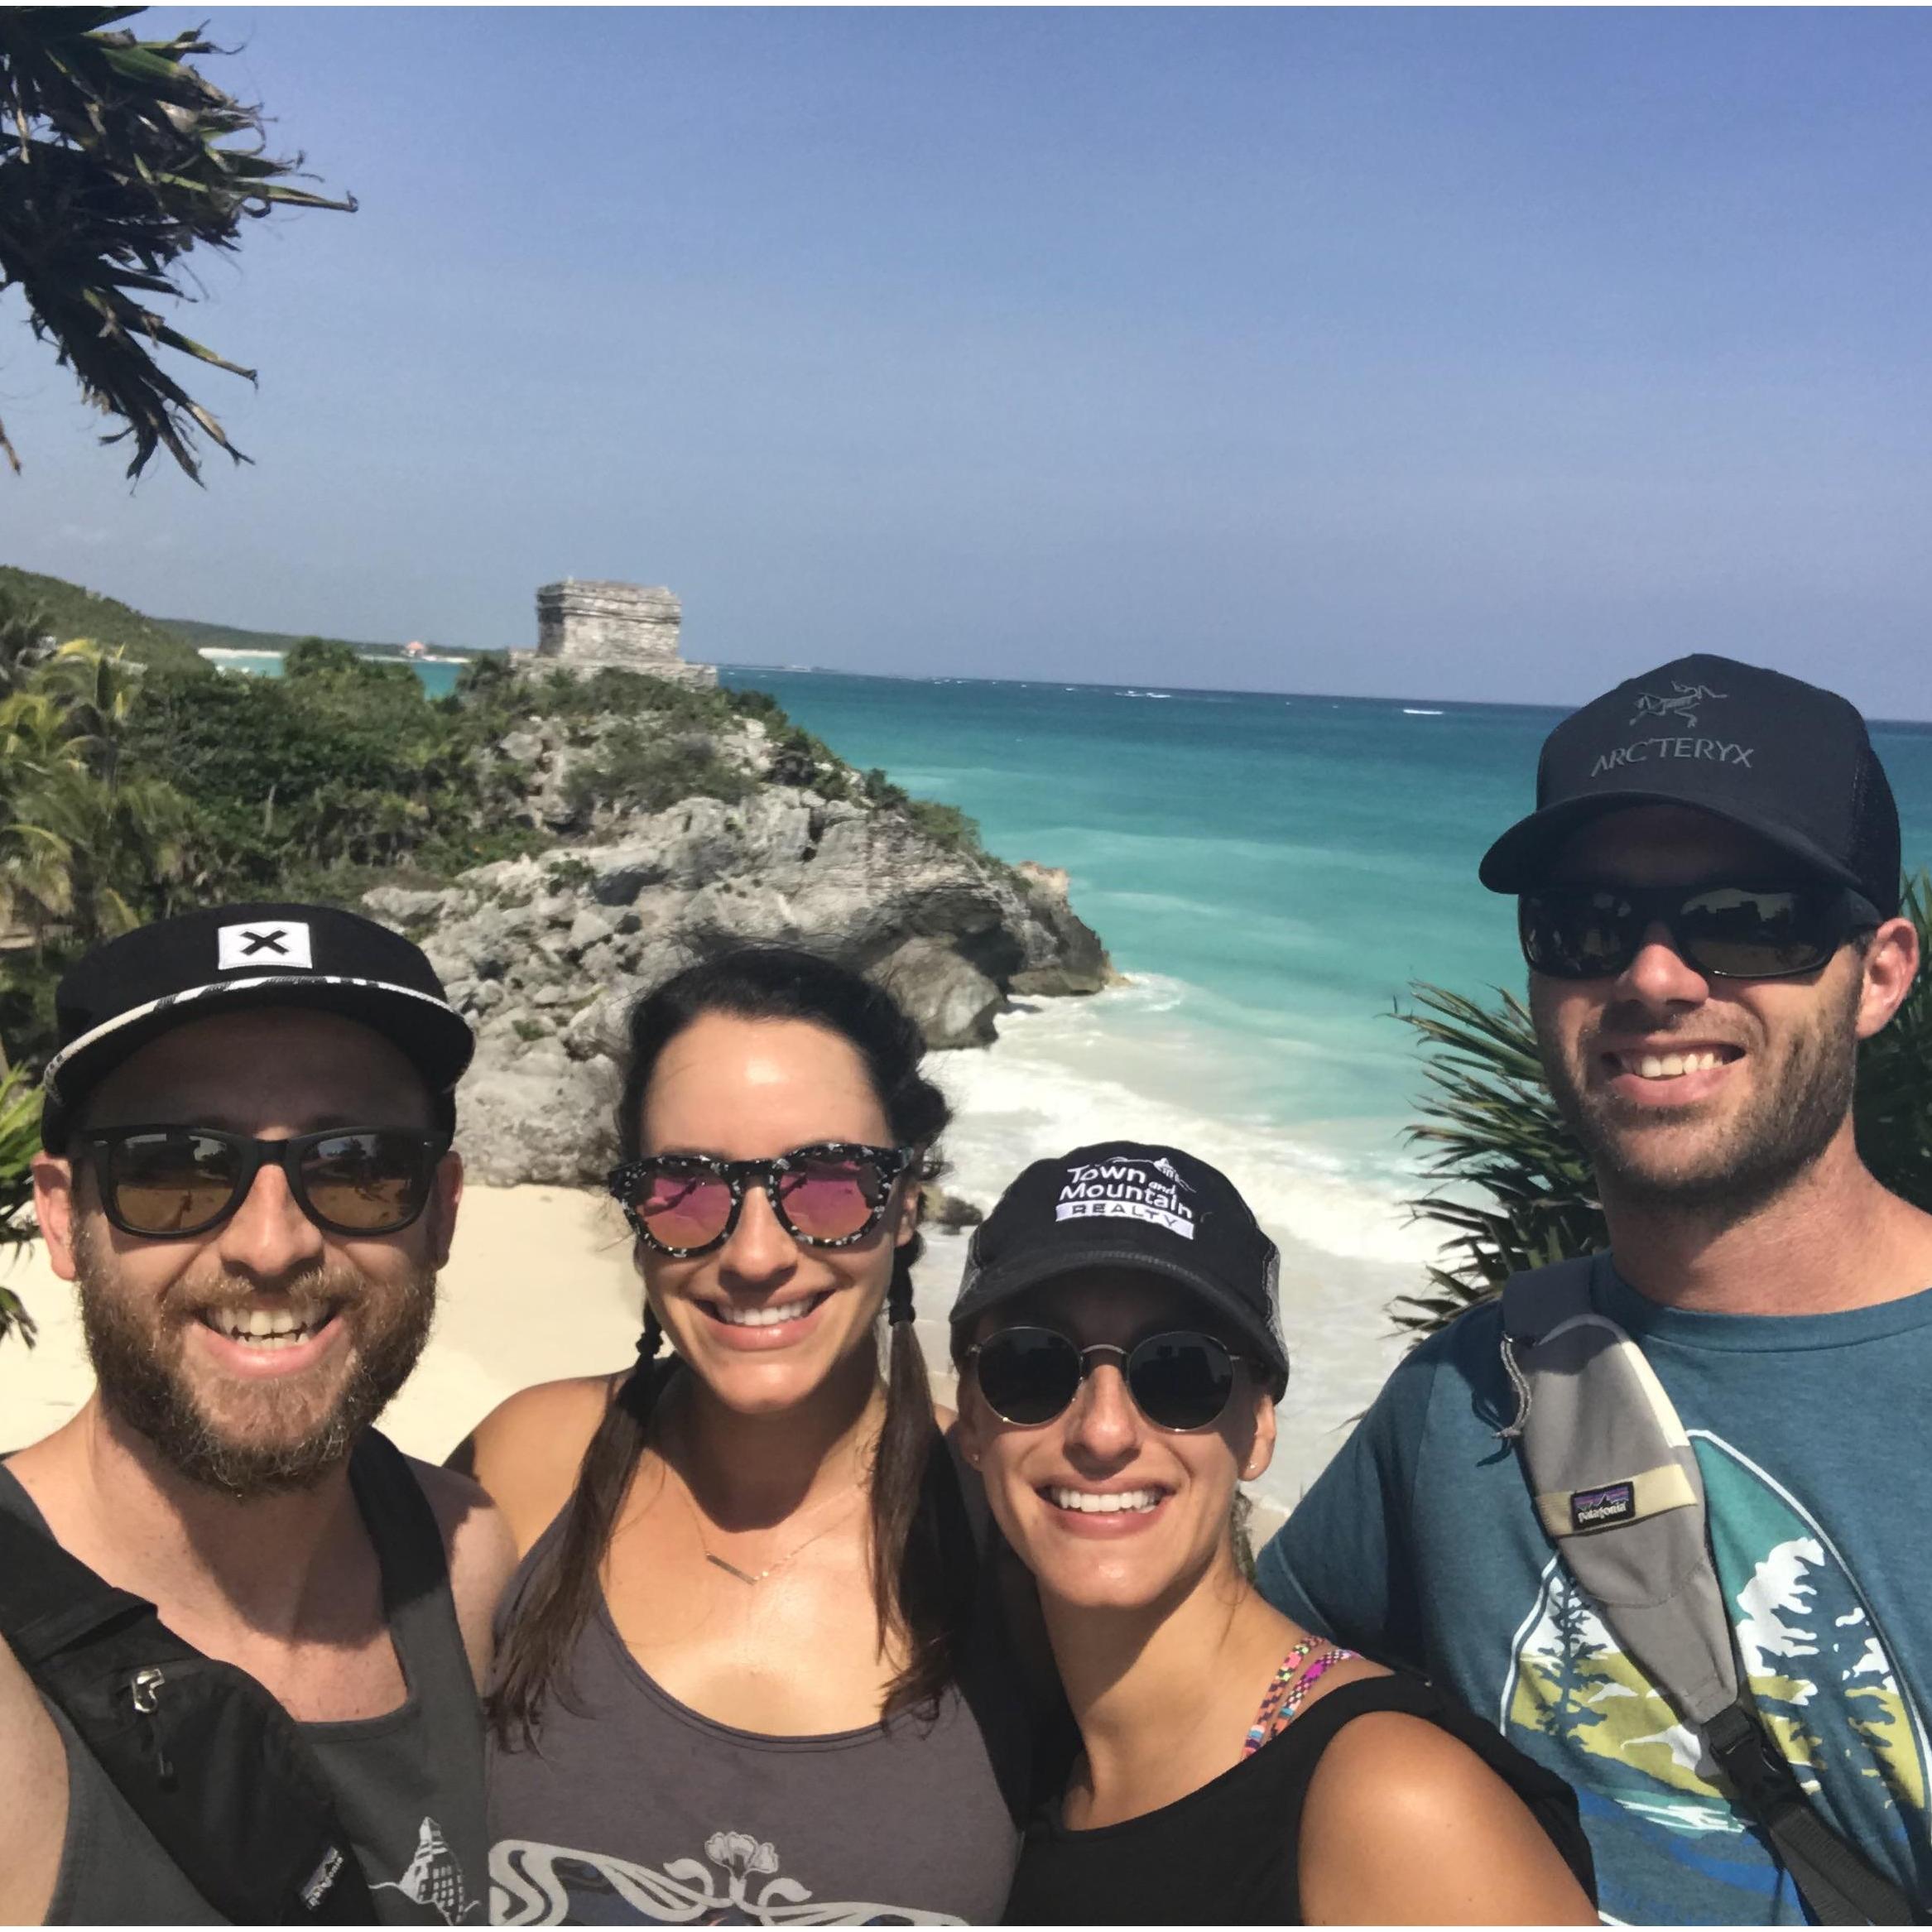 Exploring the ruins in Mexico with the Miller-Macks!